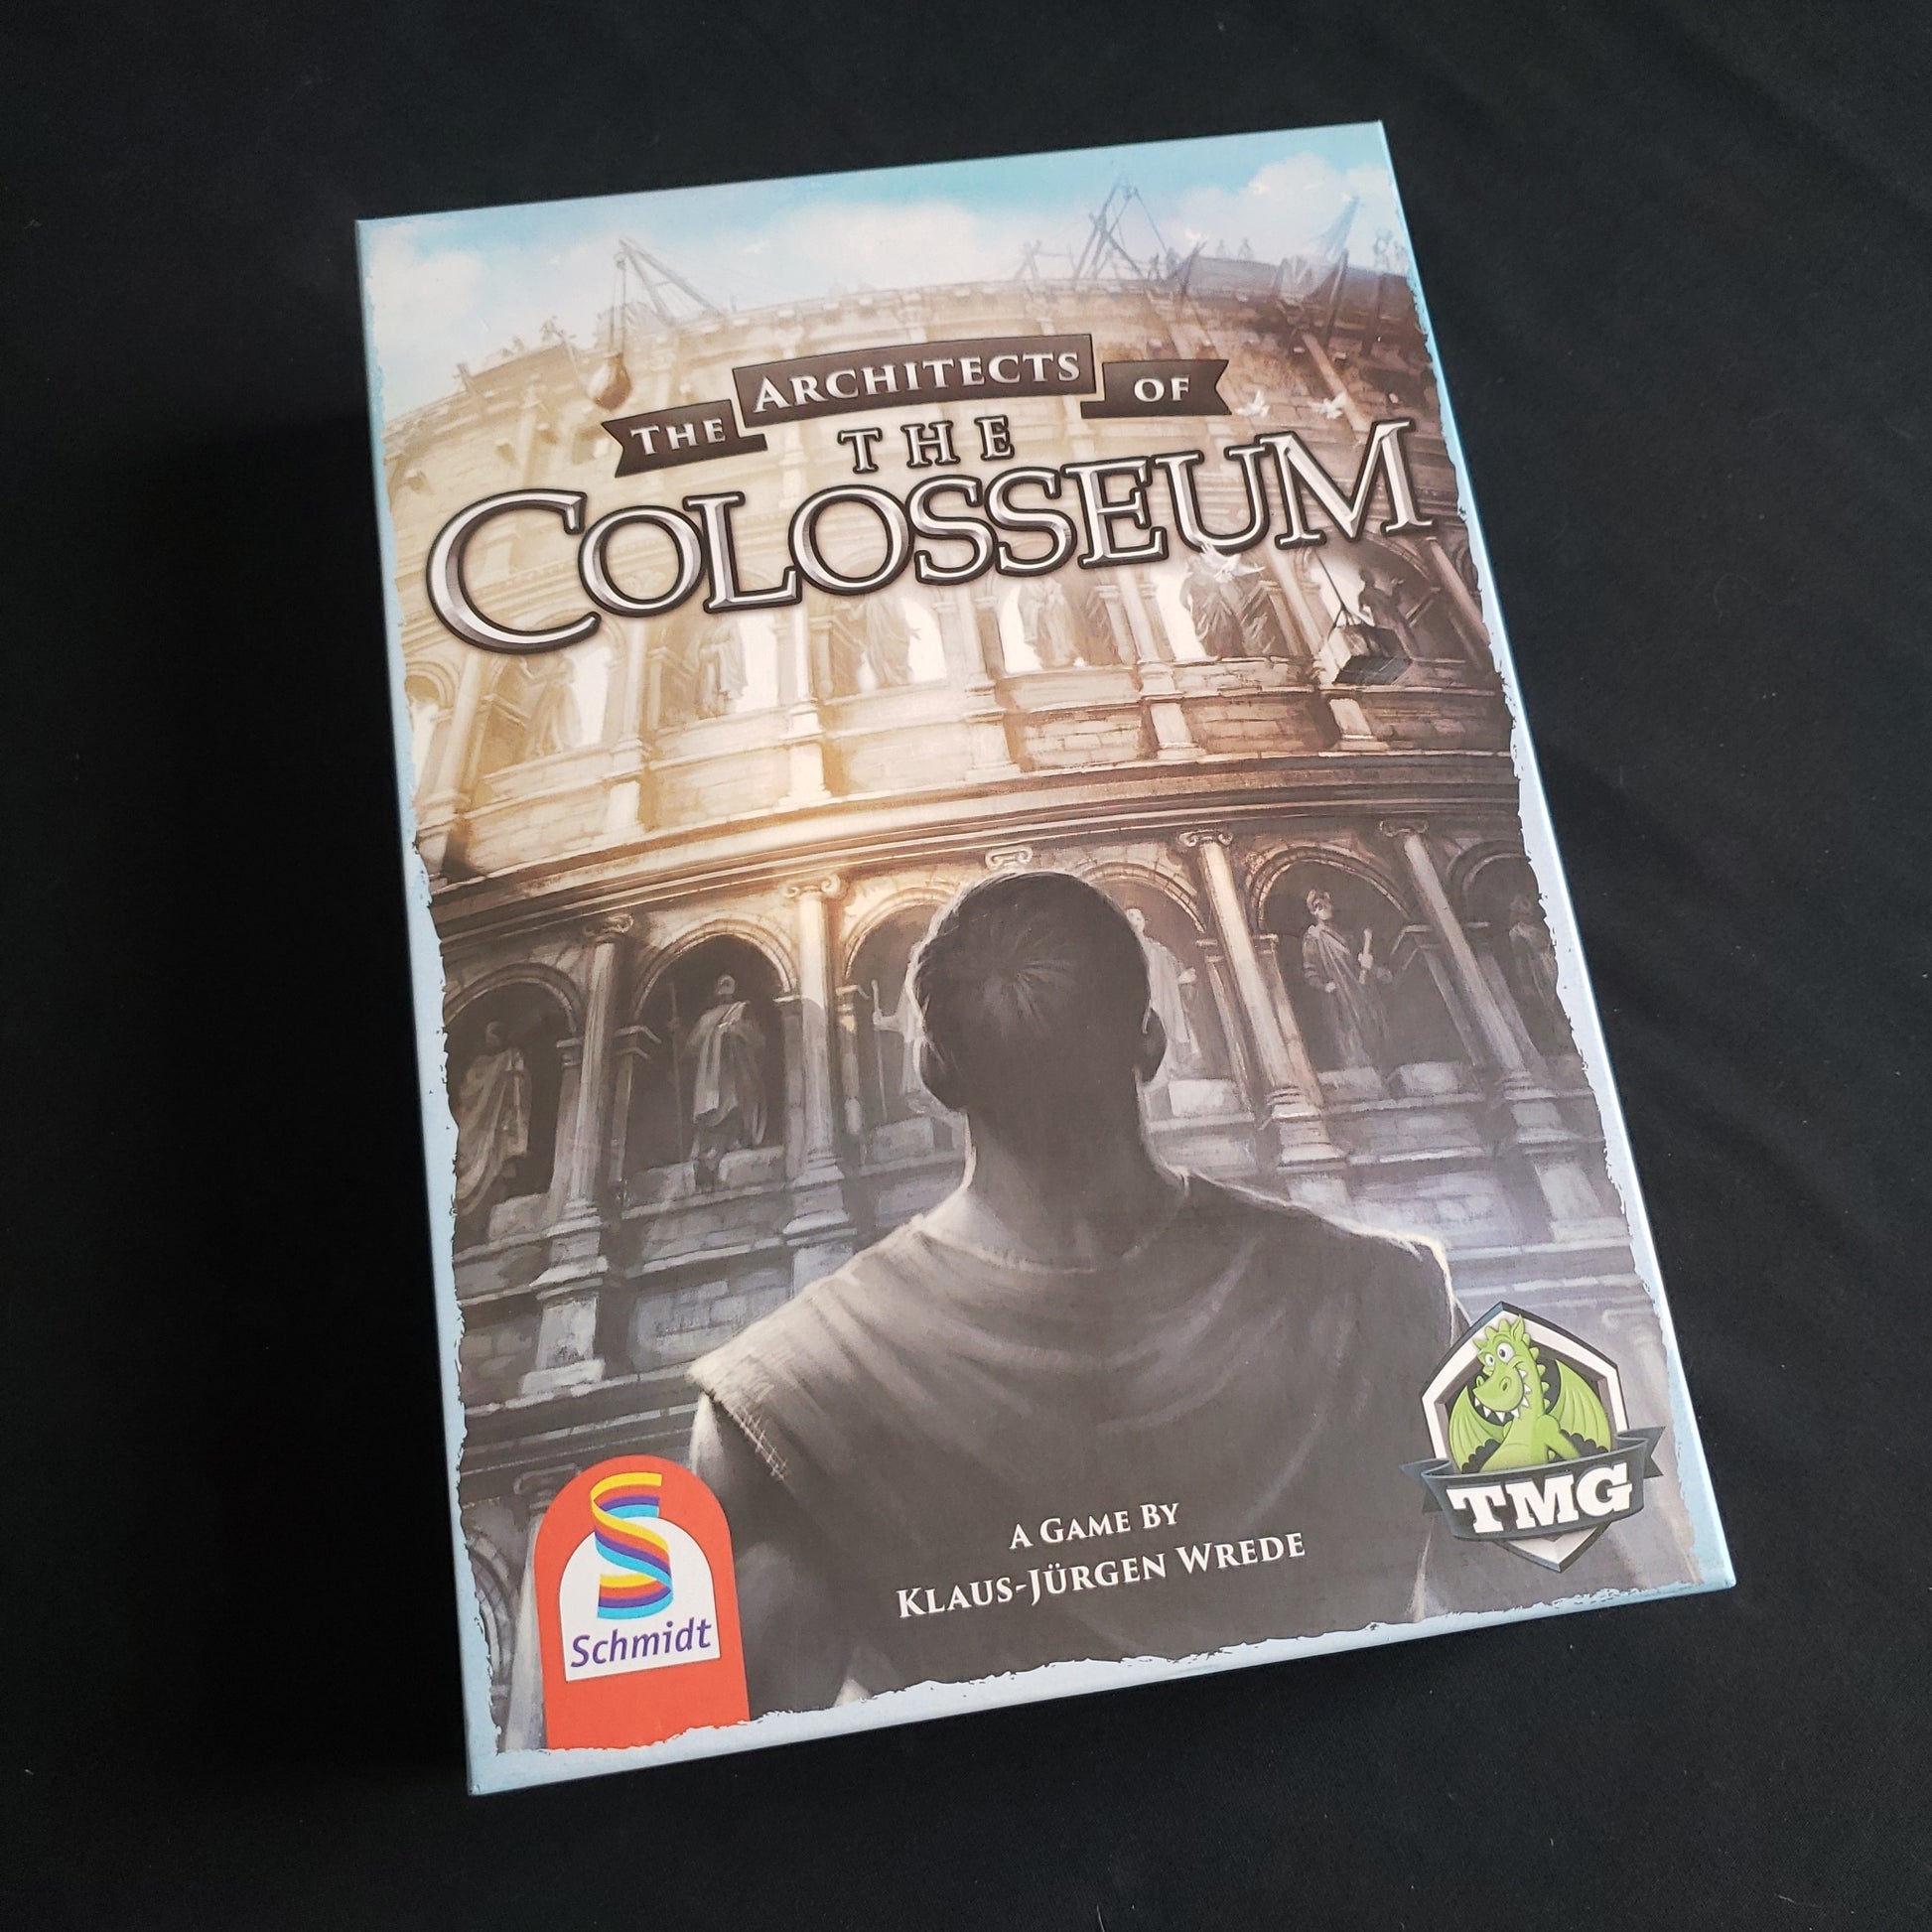 Image shows the front cover of the box of the Architects of the Colosseum board game